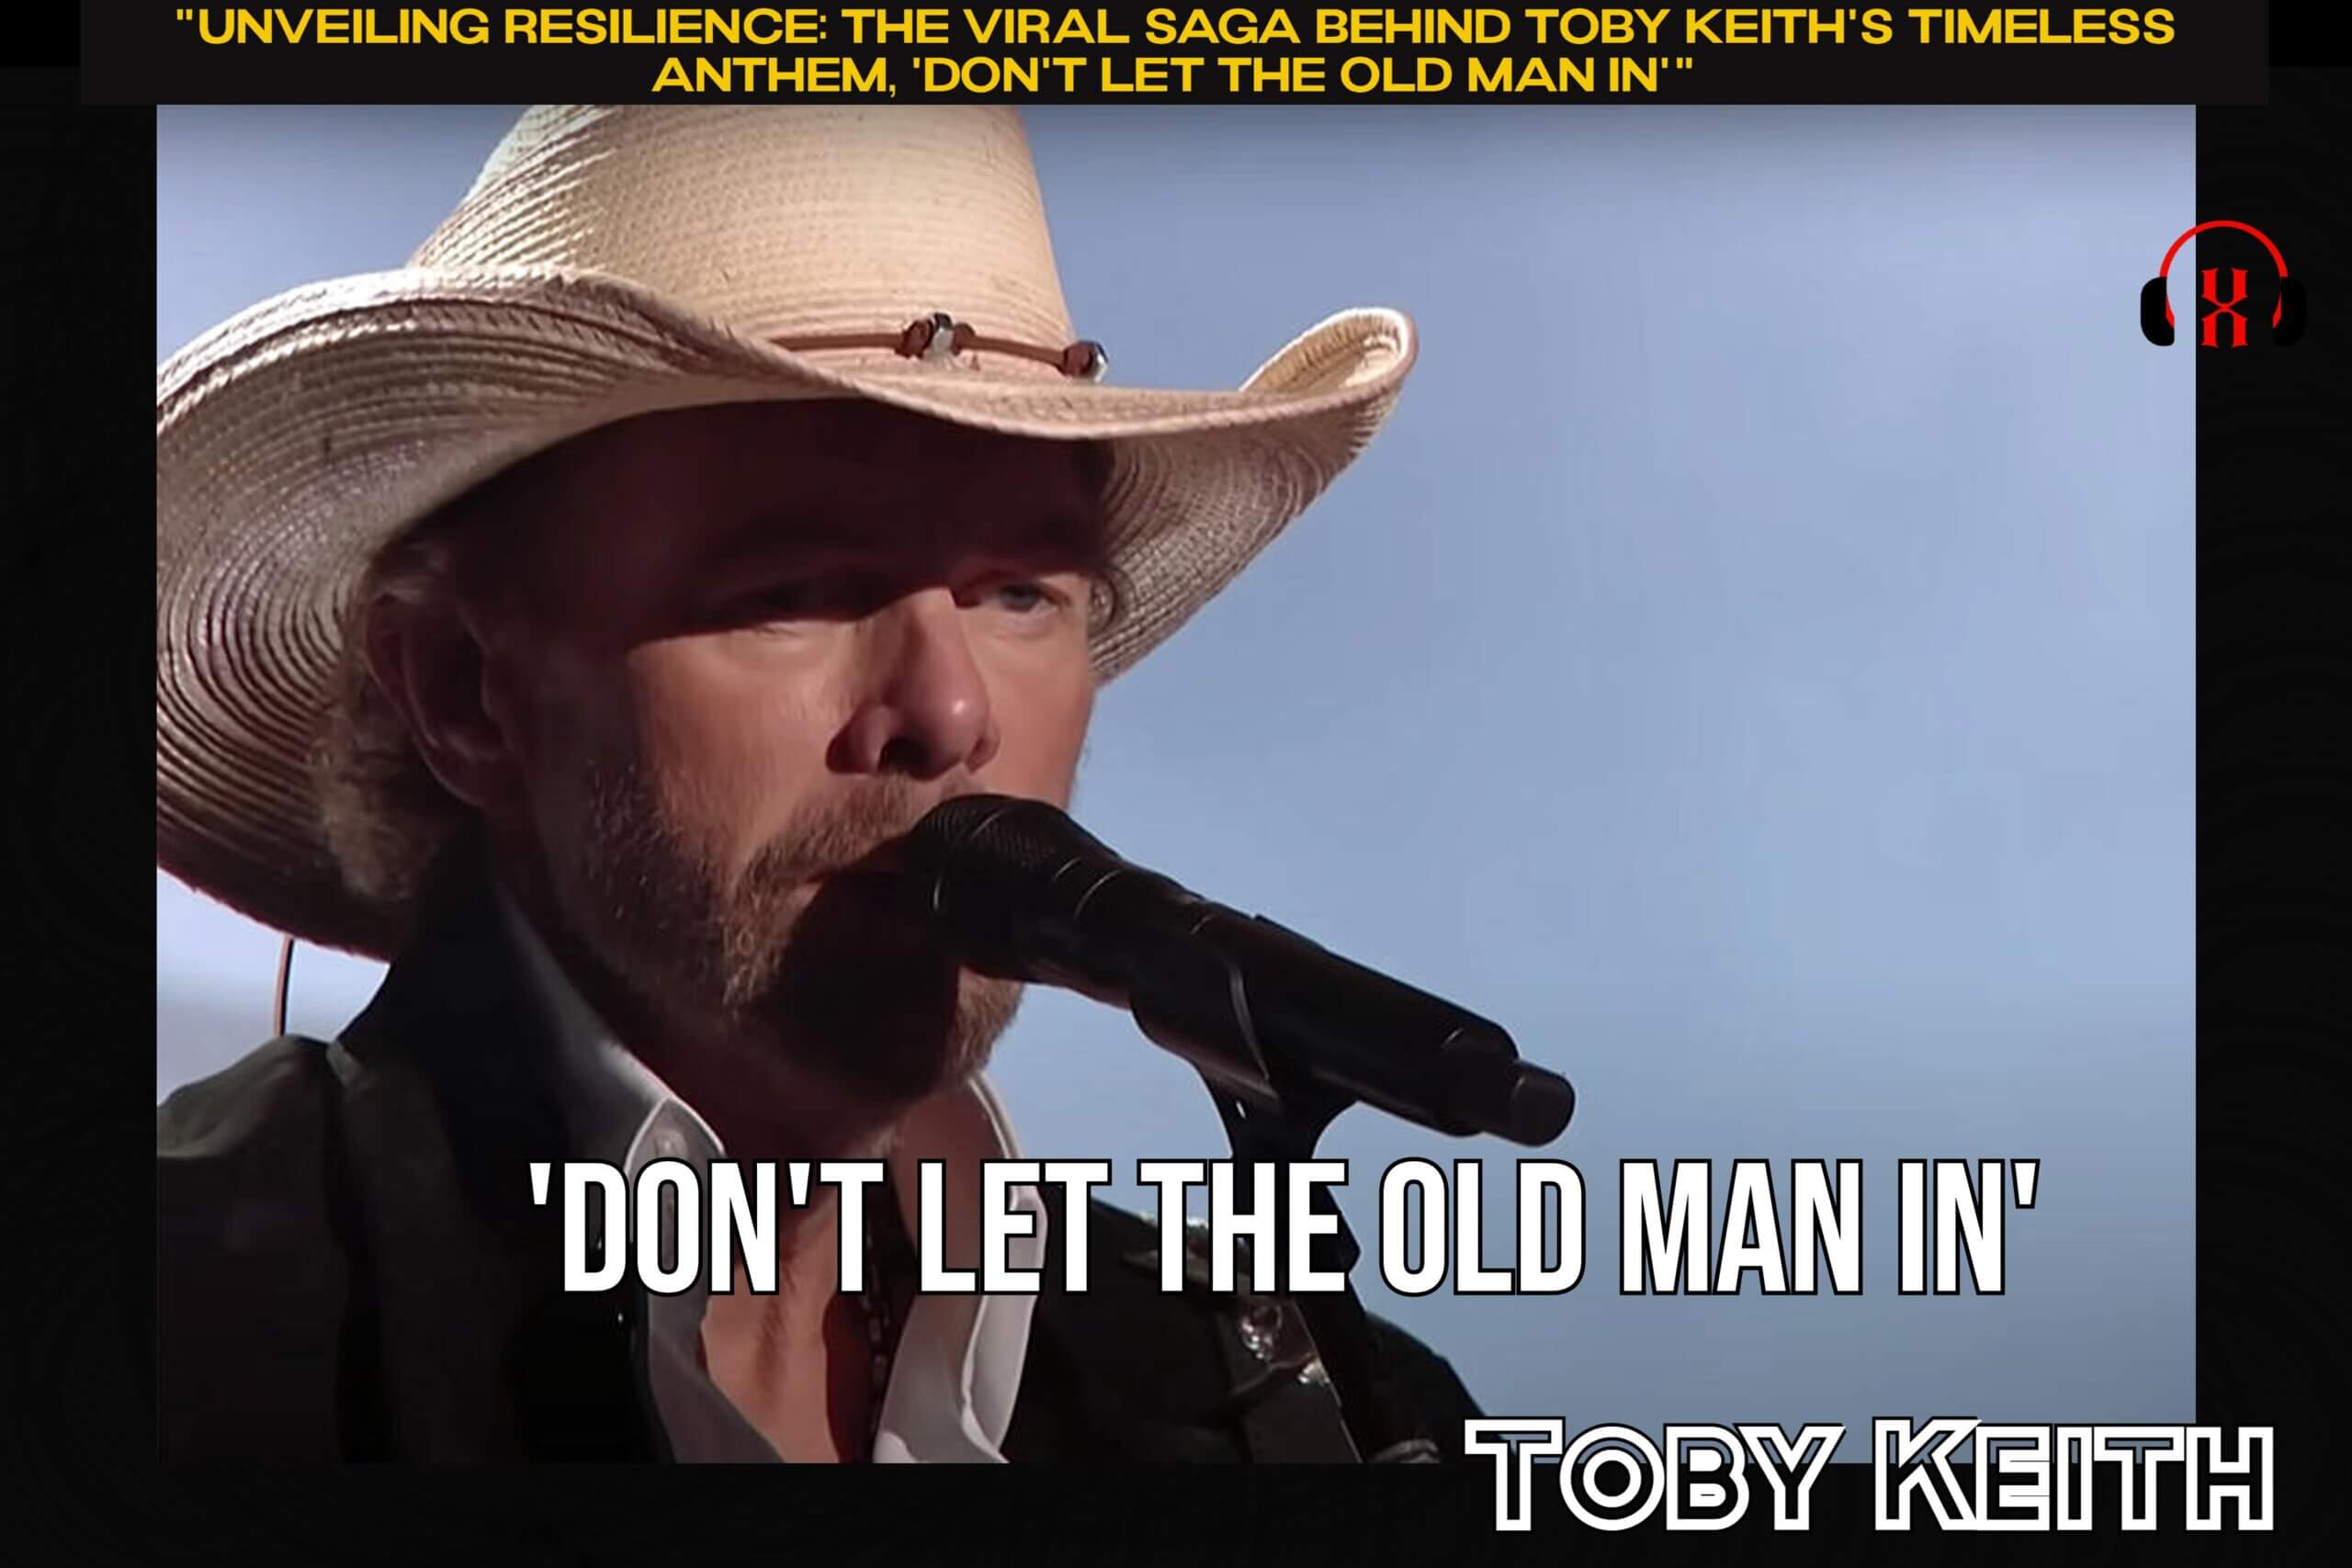 "Unveiling Resilience: The Viral Saga Behind Toby Keith's Timeless Anthem, 'Don't Let the Old Man In'"